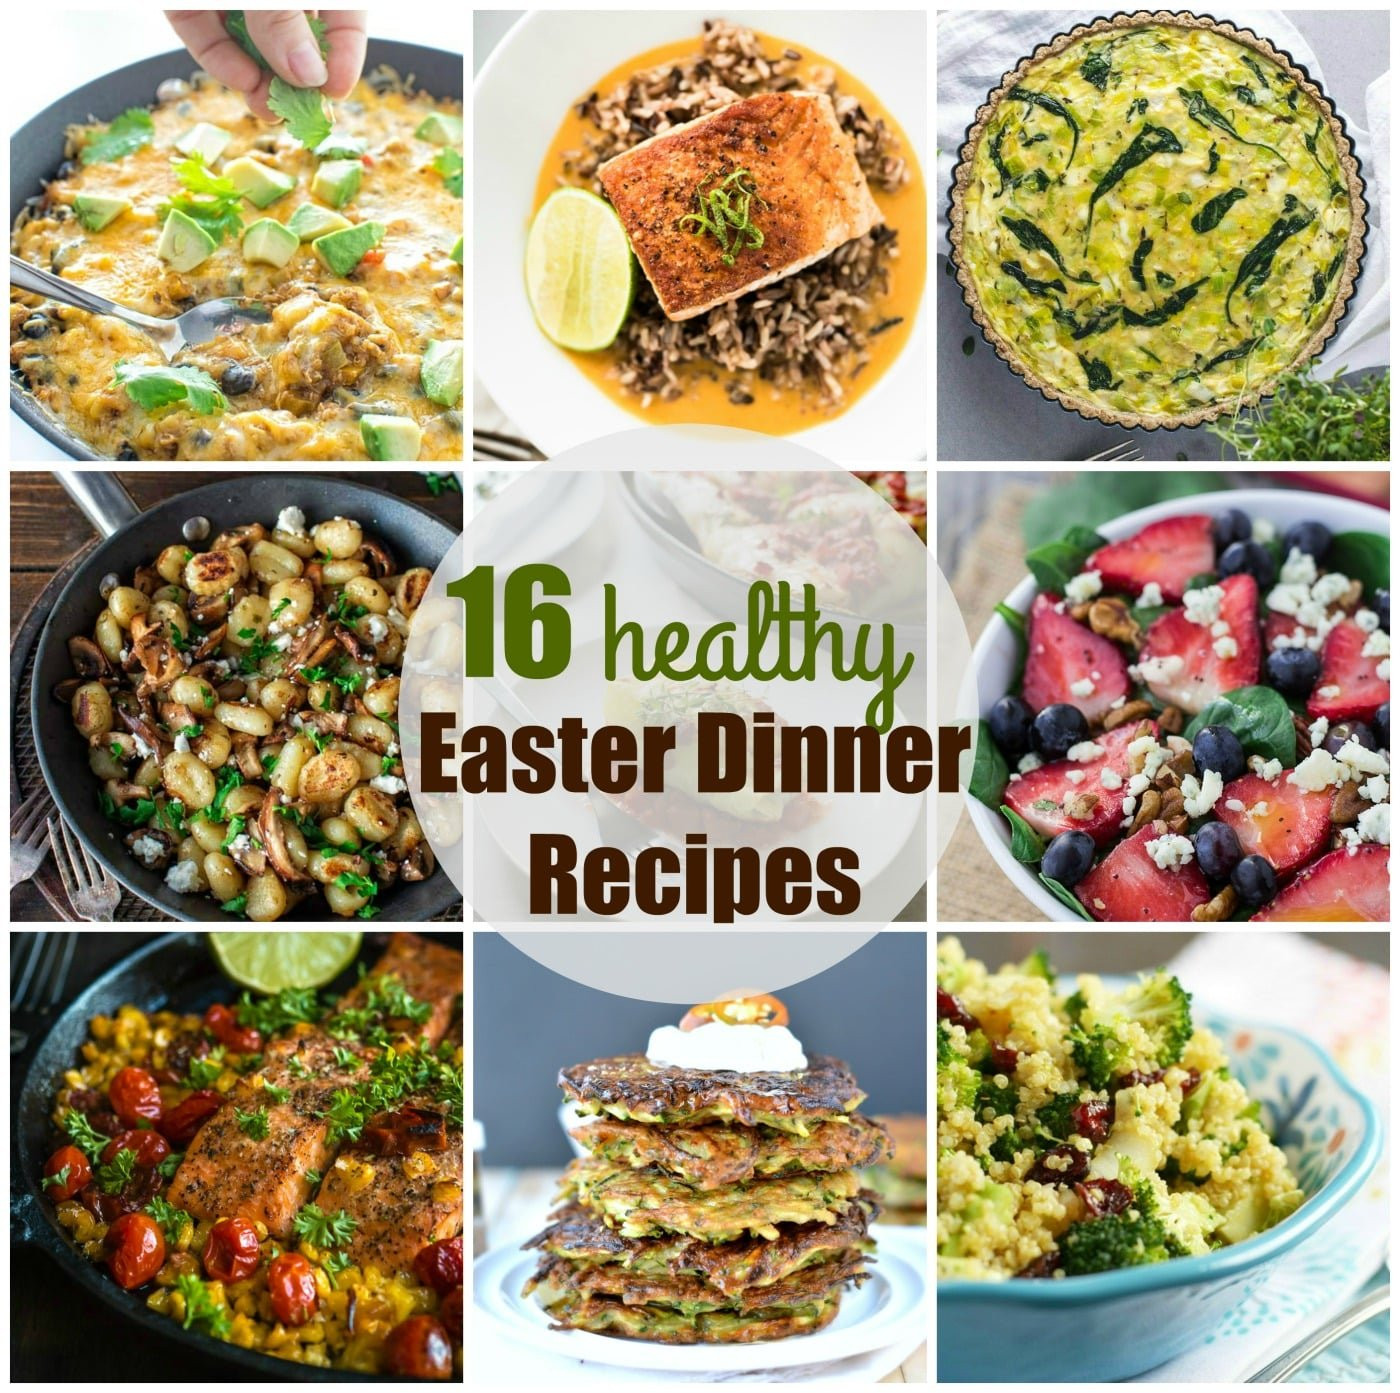 Healthy Easter Dinner Recipes Unique Easter Dinner Recipes 16 Healthy Easter Recipes